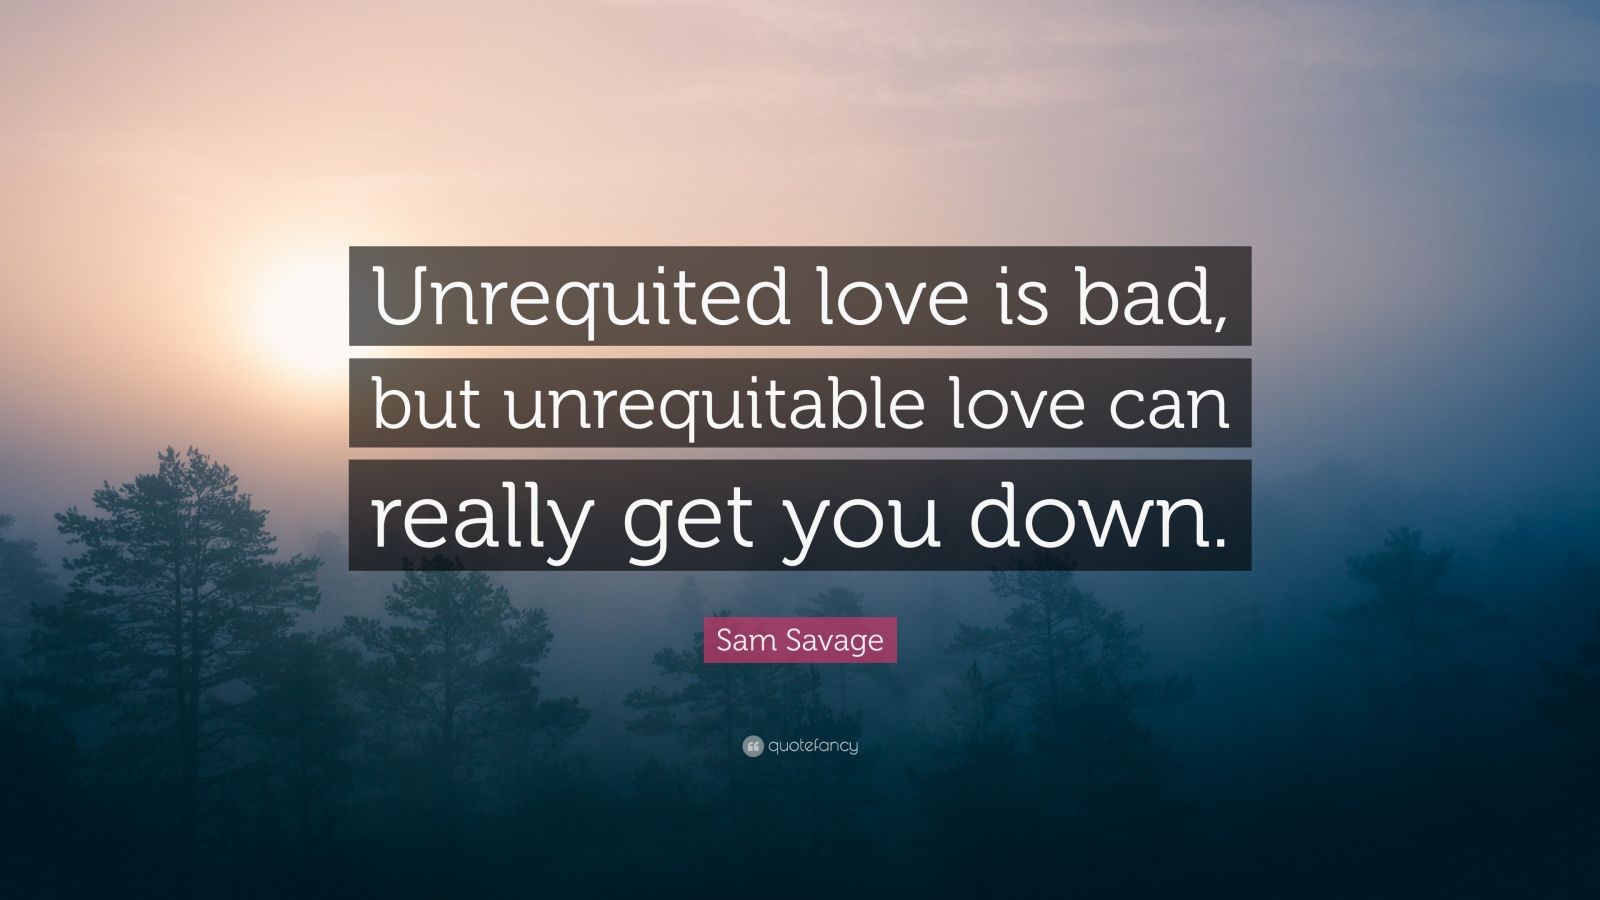 is unrequited love unhealthy